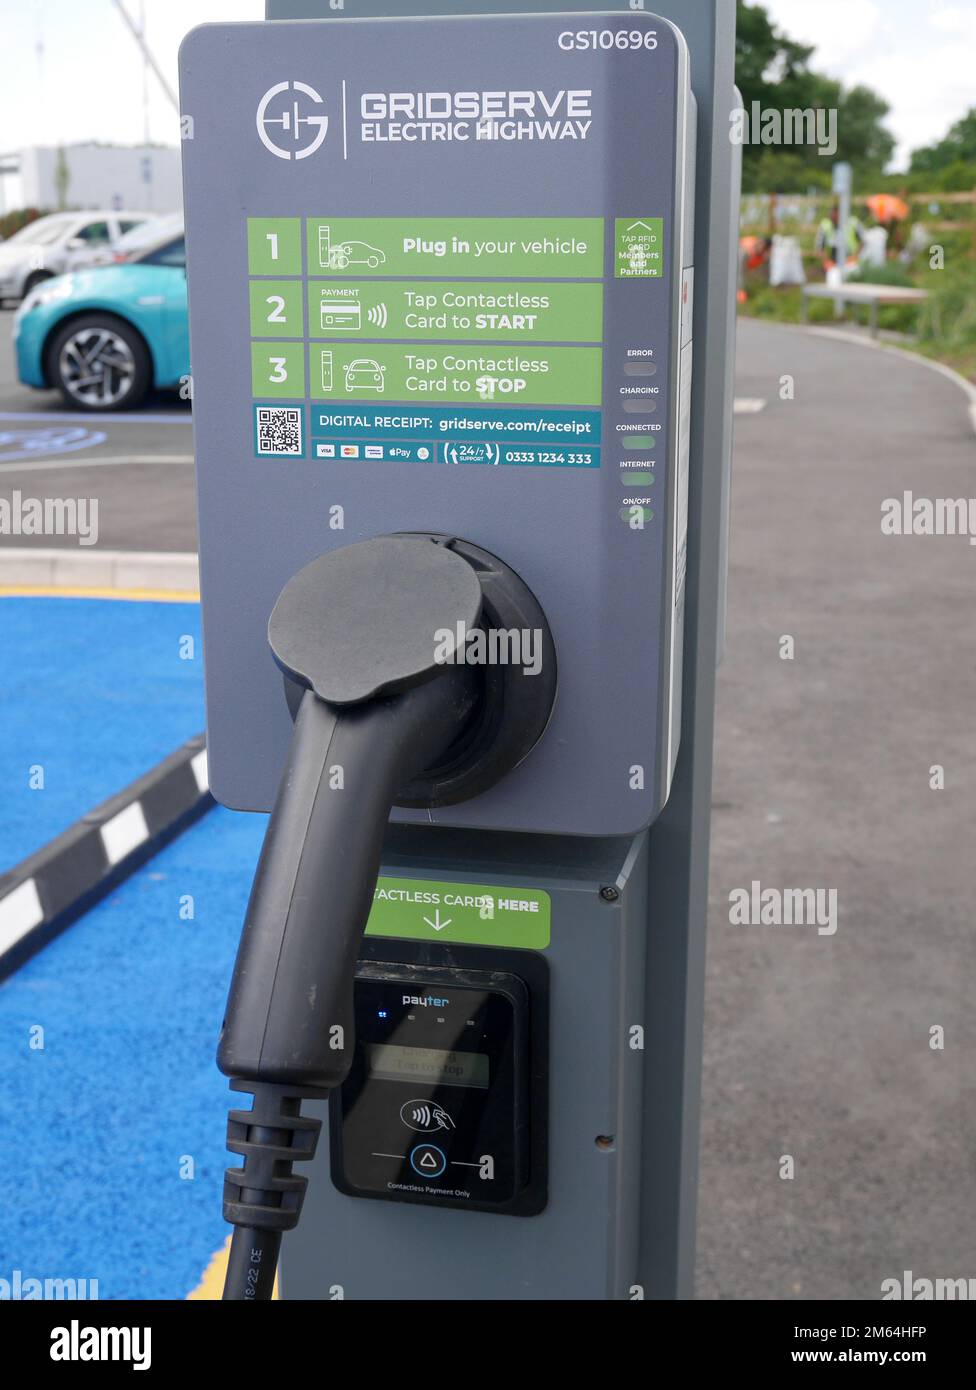 Gridserve Electric Highway, EV Charging Terminal available for charging Electric Vehicles on its dedicated parking areas,  Norwich, Norfolk, England Stock Photo